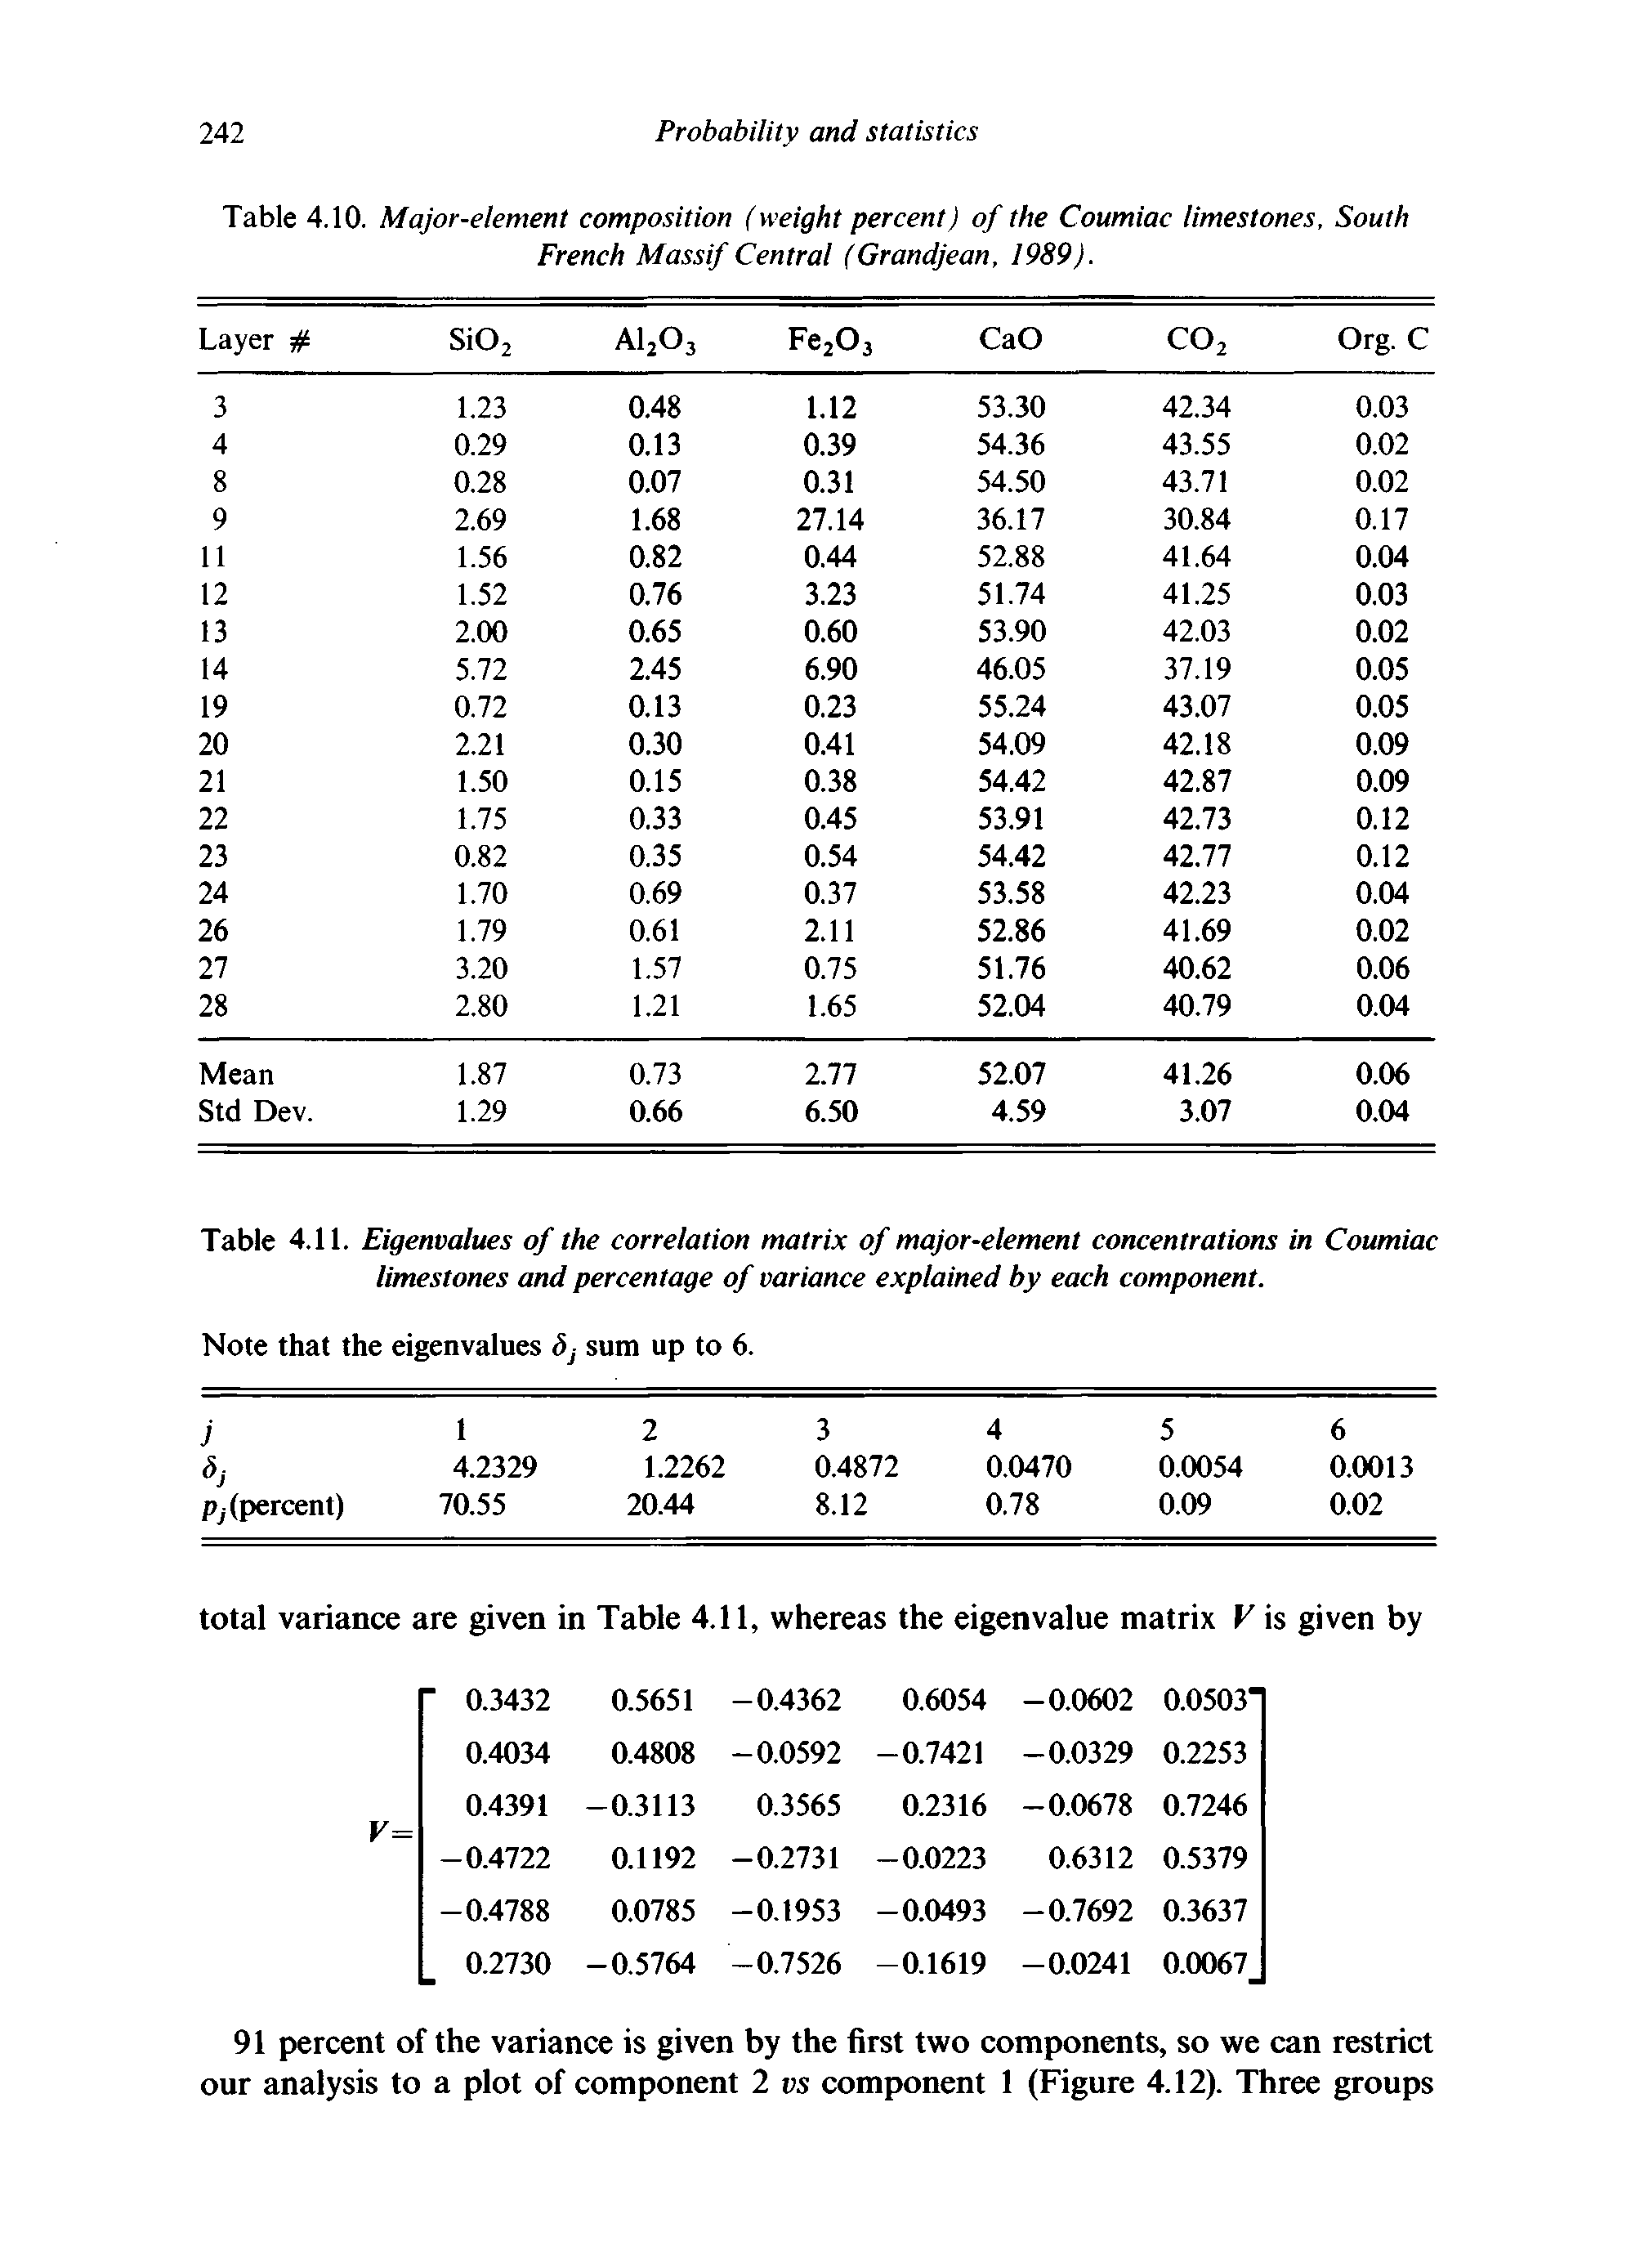 Table 4.11. Eigenvalues of the correlation matrix of major-element concentrations in Coumiac limestones and percentage of variance explained by each component.